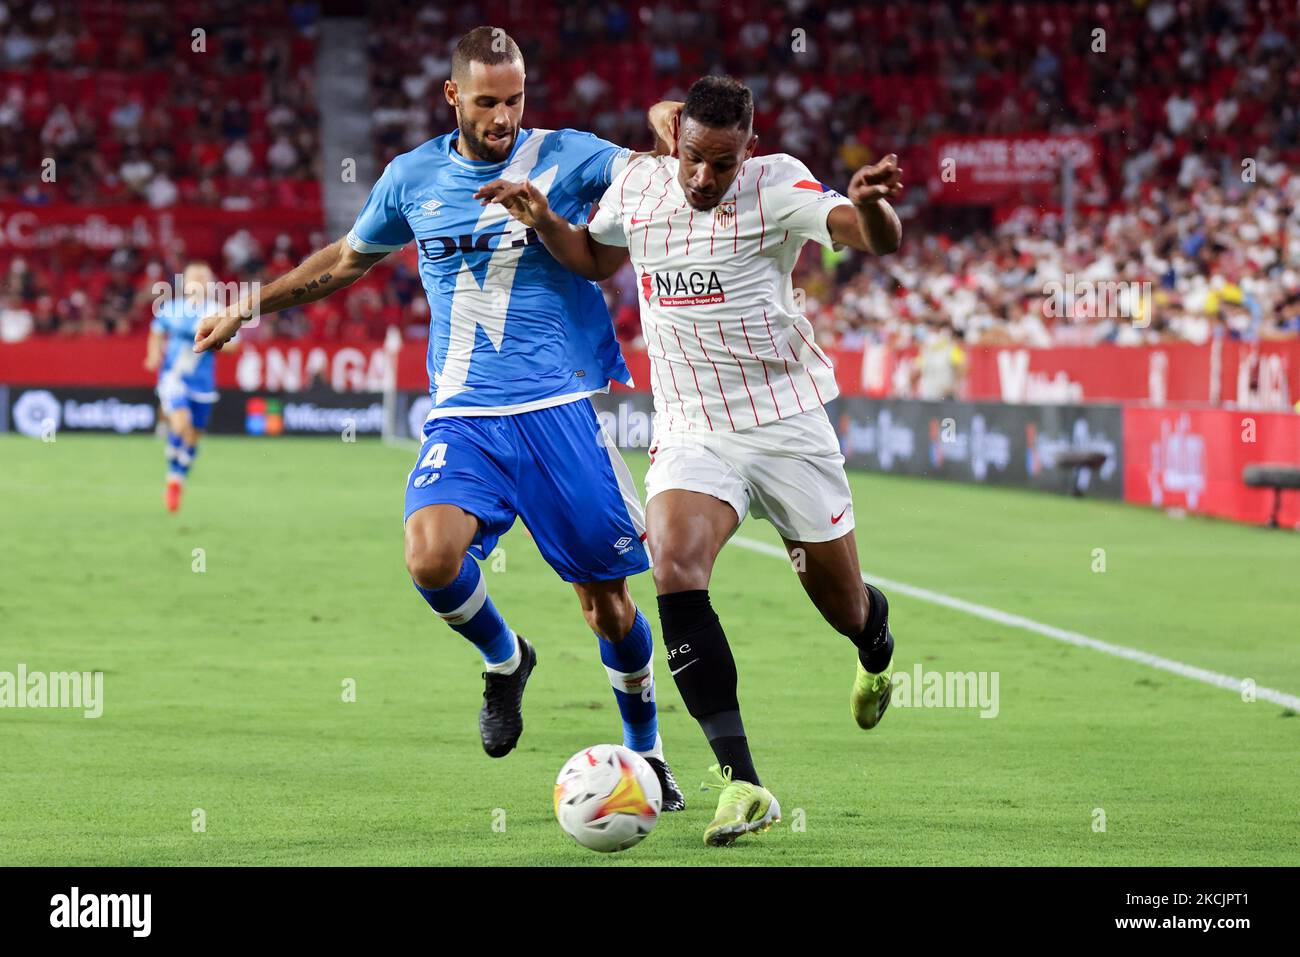 Fernando Reges of Sevilla CF in action with Mario Suarez of Rayo Vallecano de Madrid during the La Liga Santader match between Sevilla CF and Rayo Vallecano de Madrid at Ramon Sanchez Pizjuan in Seville, Spain, on August 15, 2021. (Photo by Jose Luis Contrearas/DAX Images/NurPhoto) Stock Photo